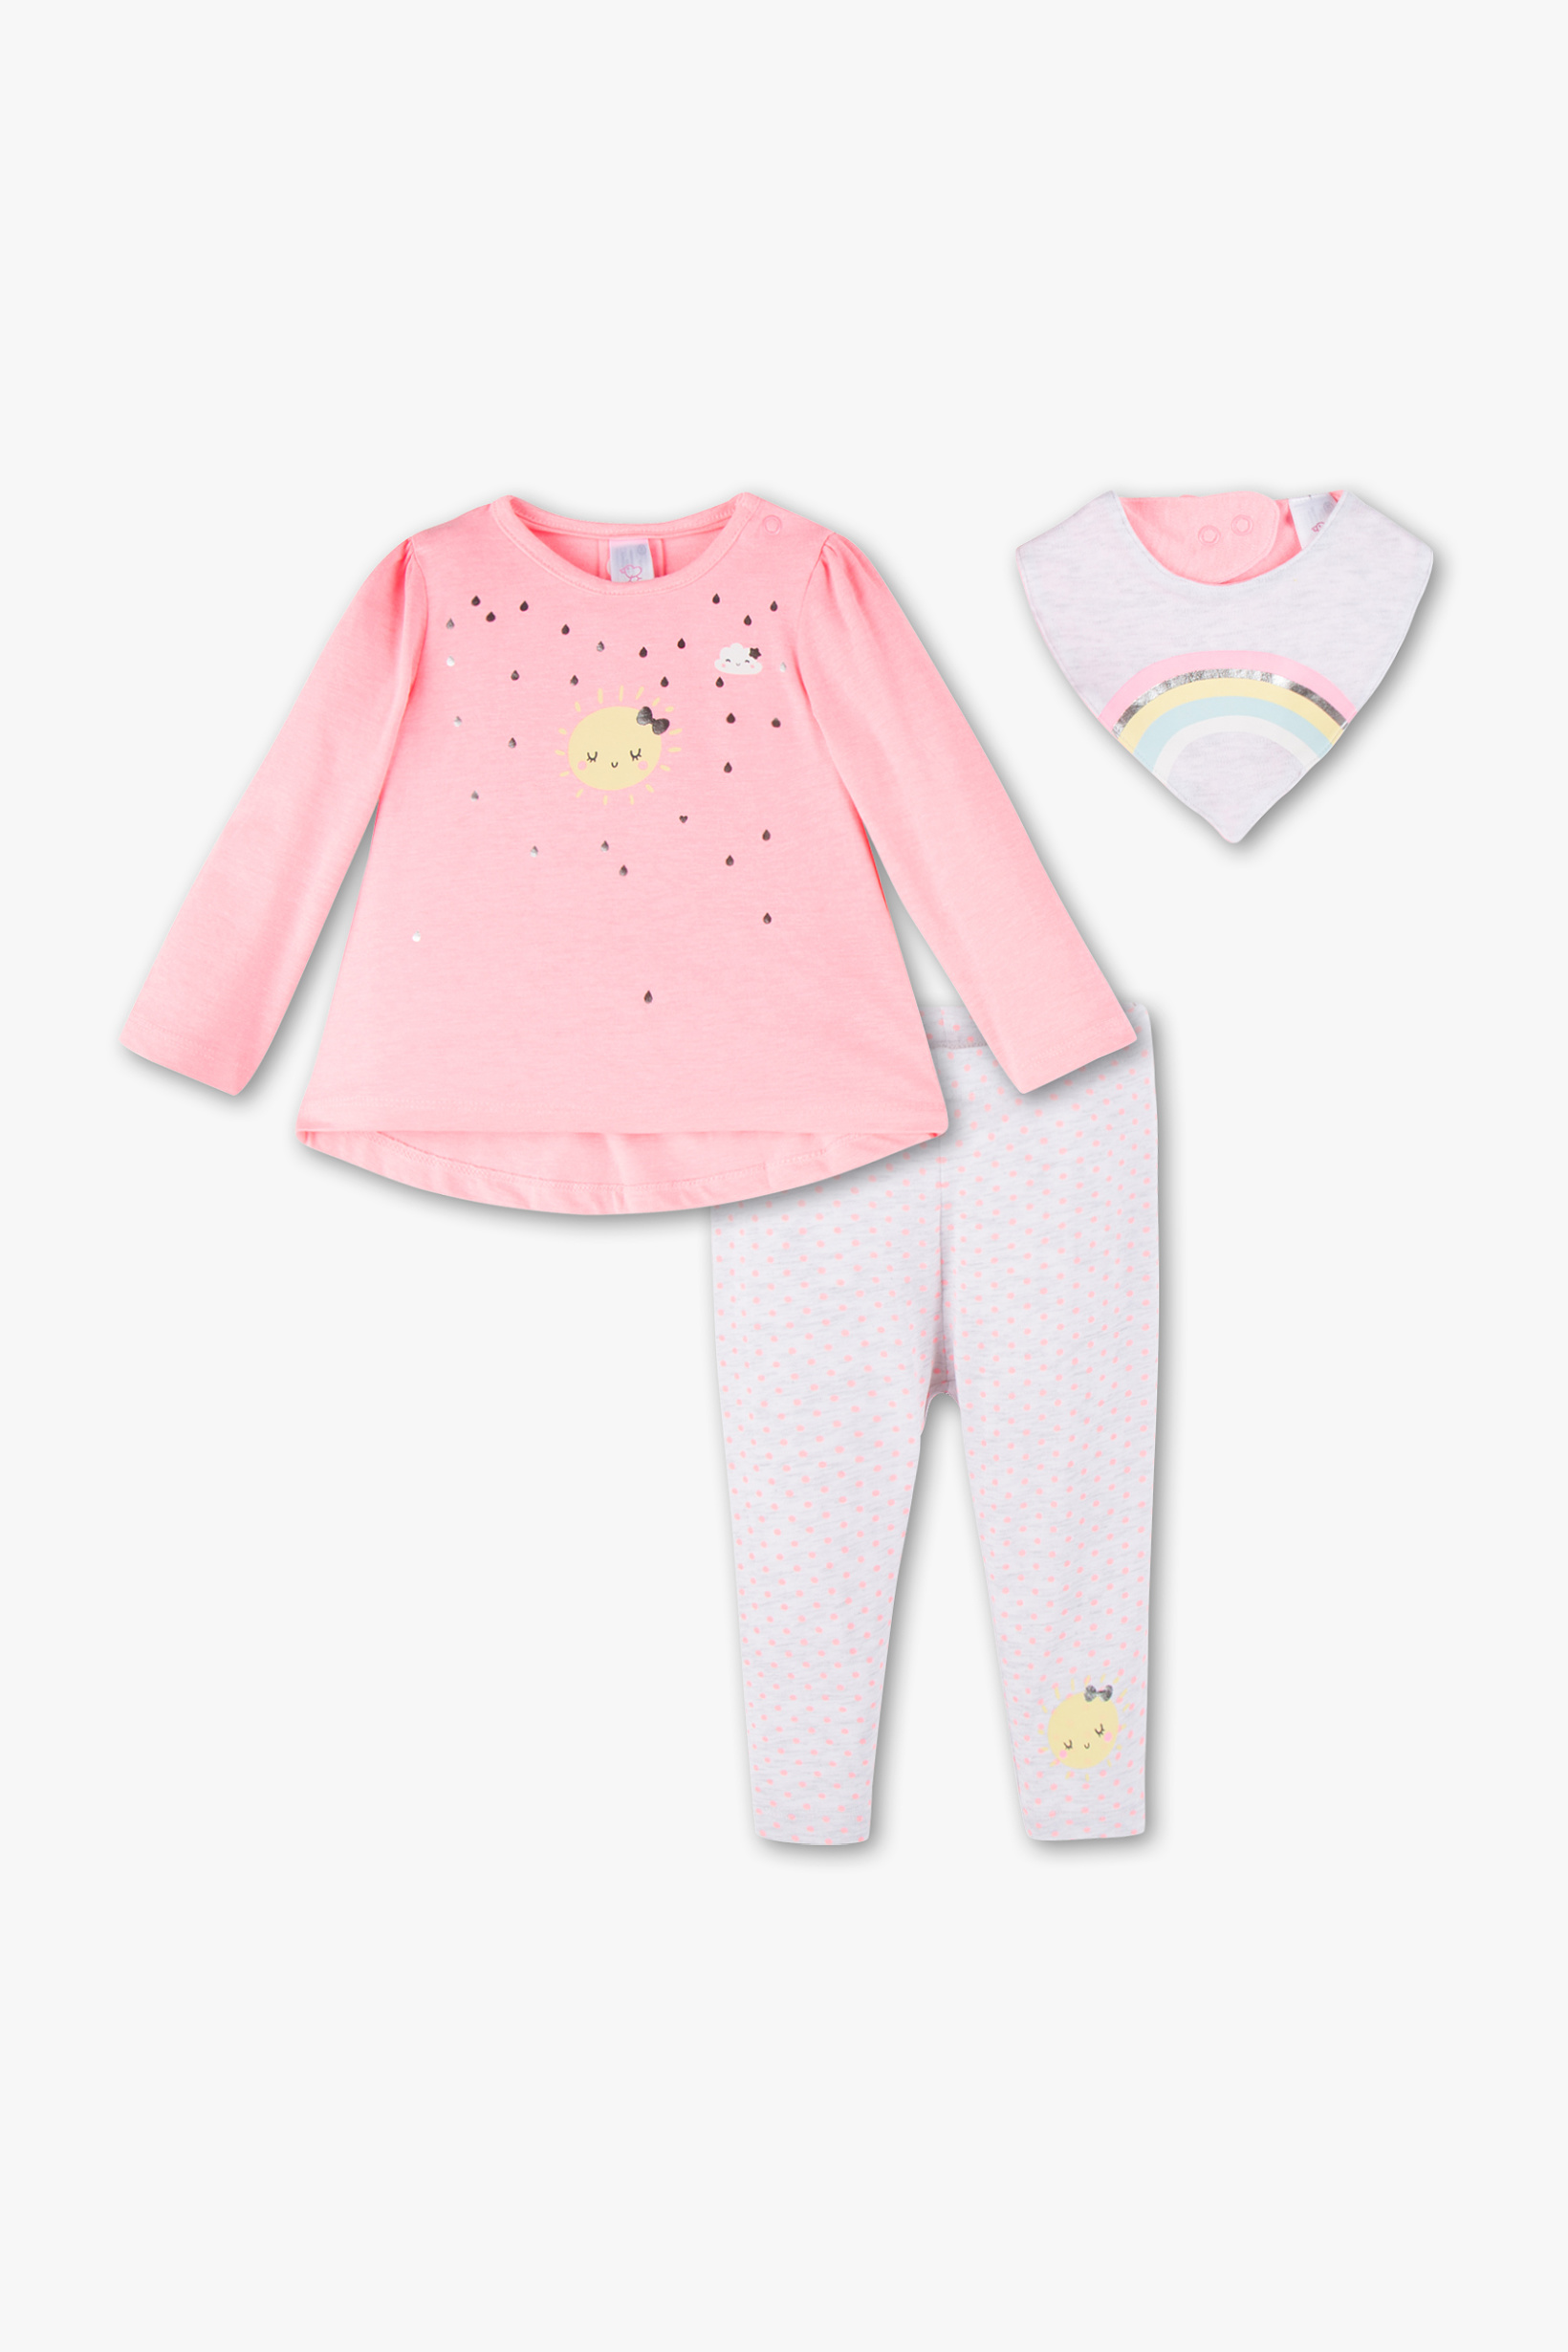 Baby Club Baby-outfit 3-delig glanseffect